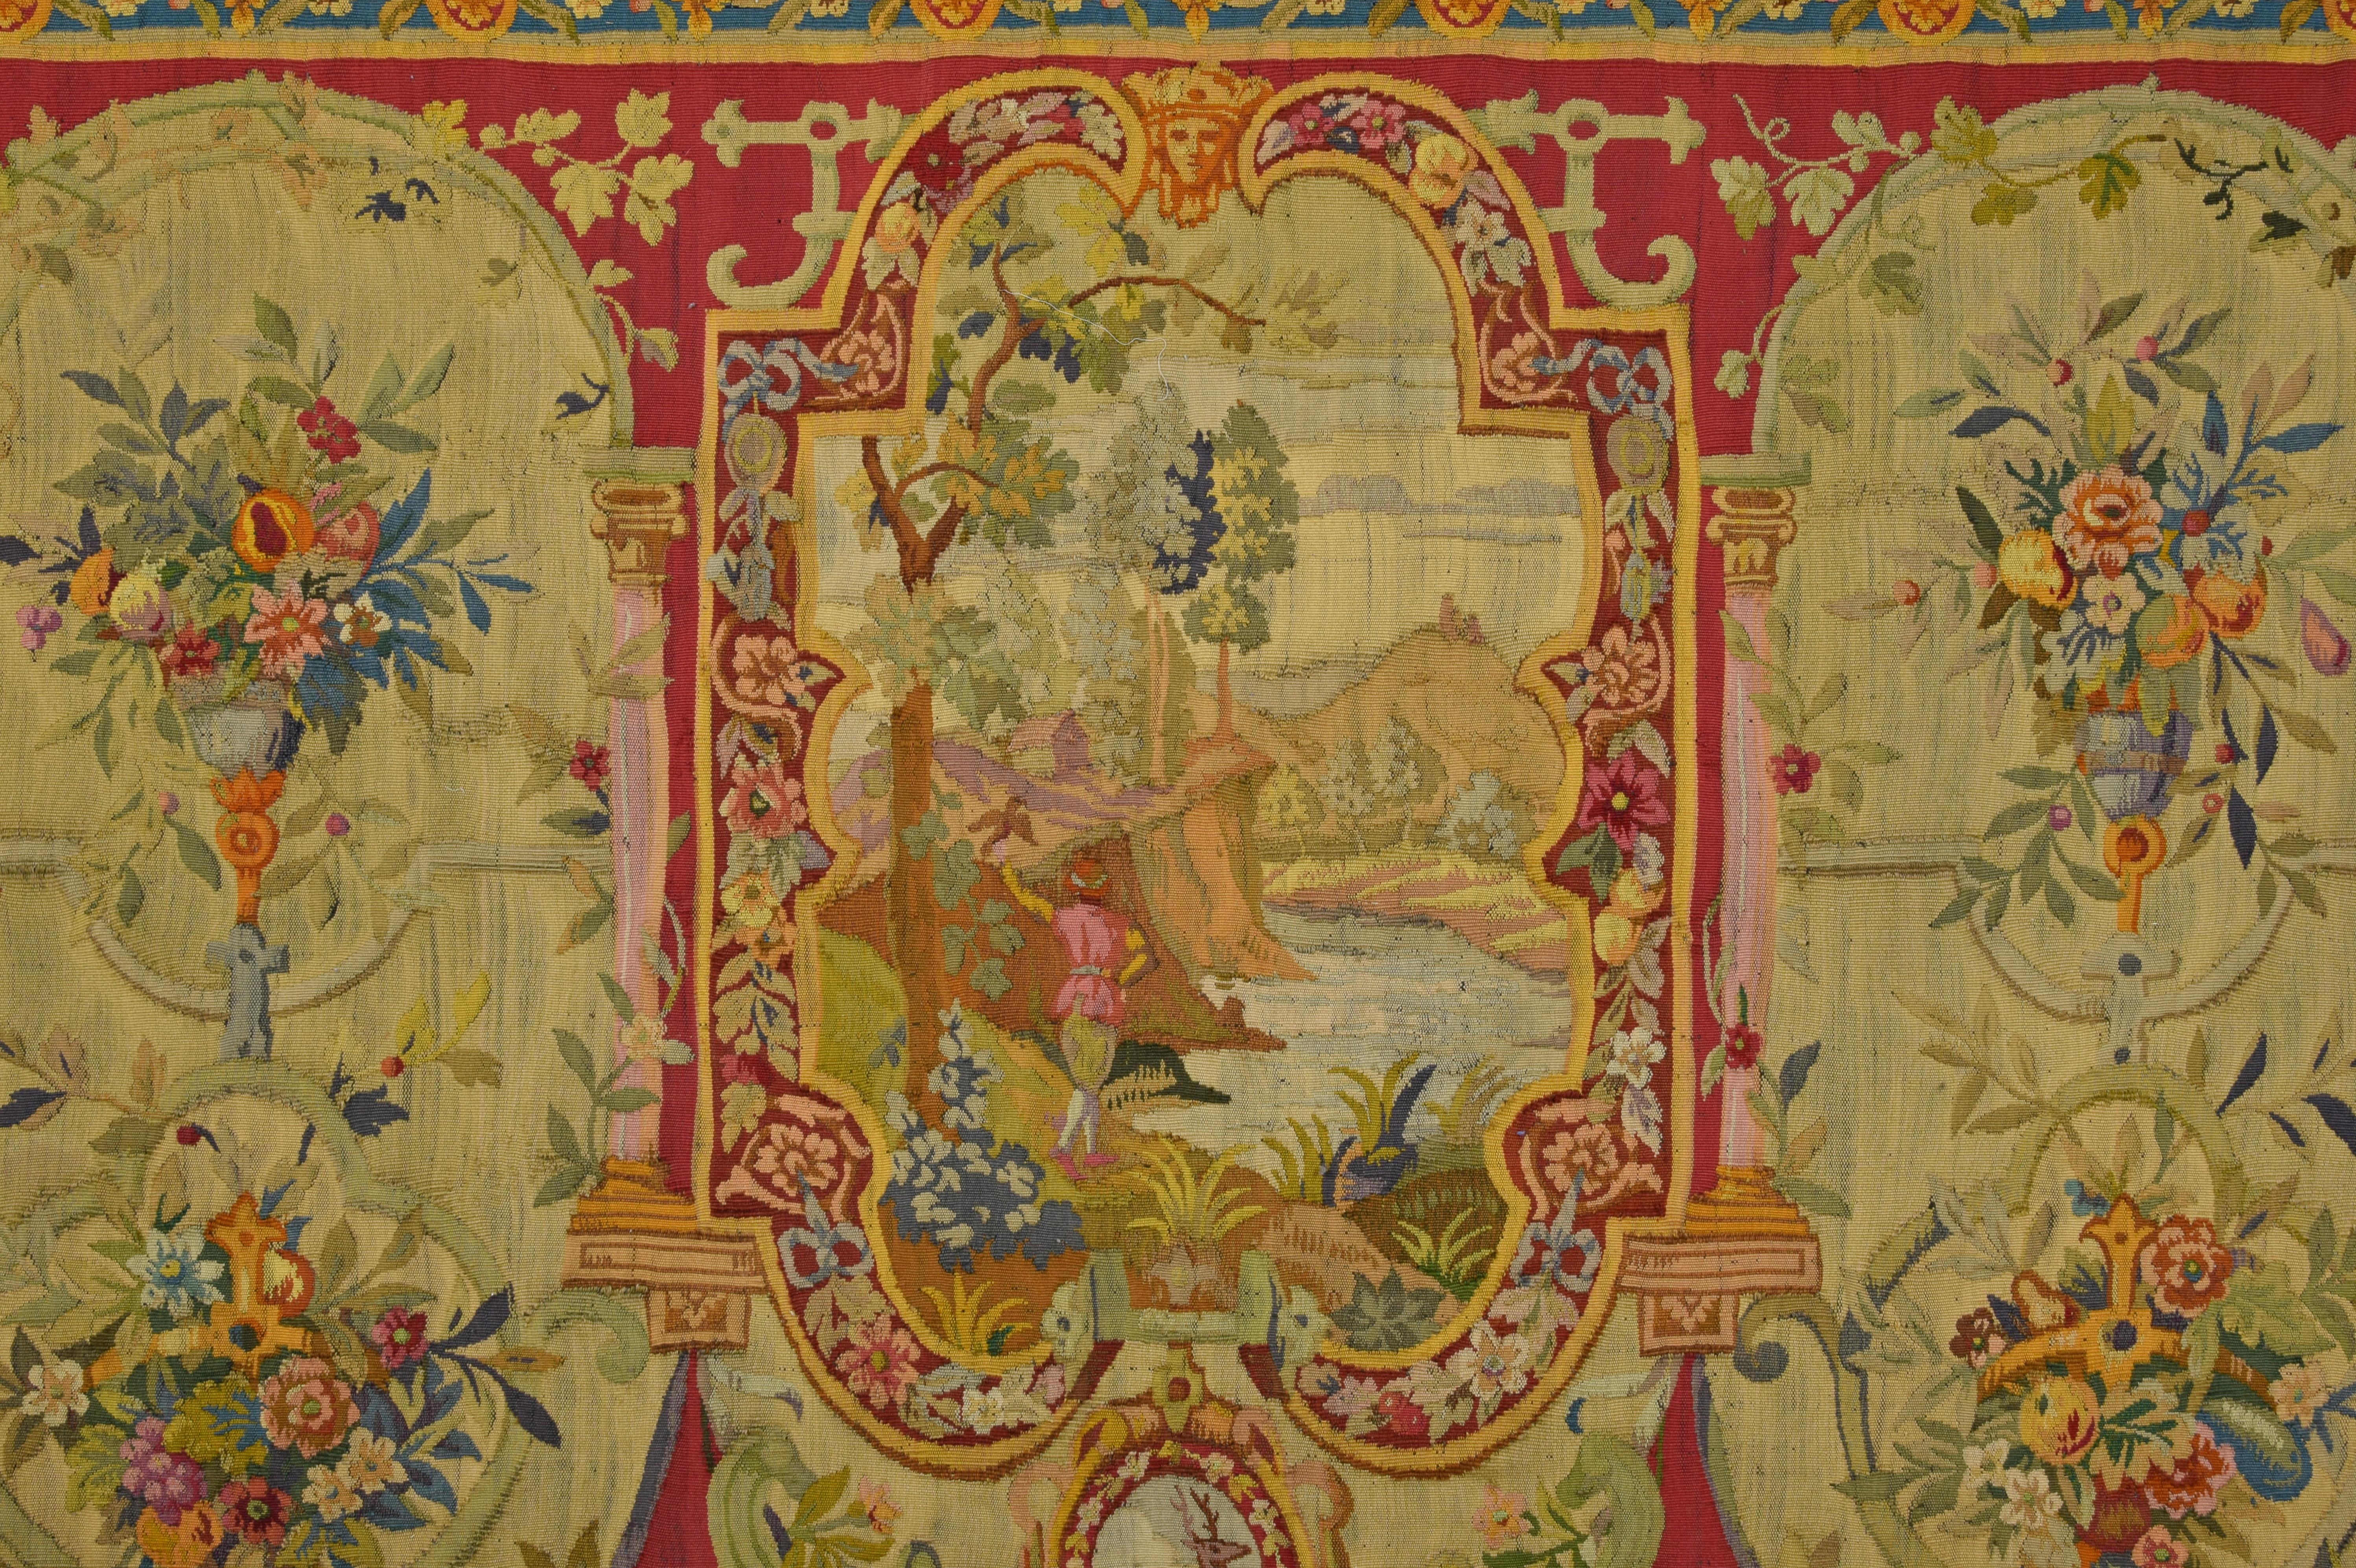 18th century wool tapestry with floral decorations and river landscape 

This large tapestry in wool was made in the Louis XV era, in the eighteenth century. It has a decoration inscribed inside a border with floral elements. The base is in red,